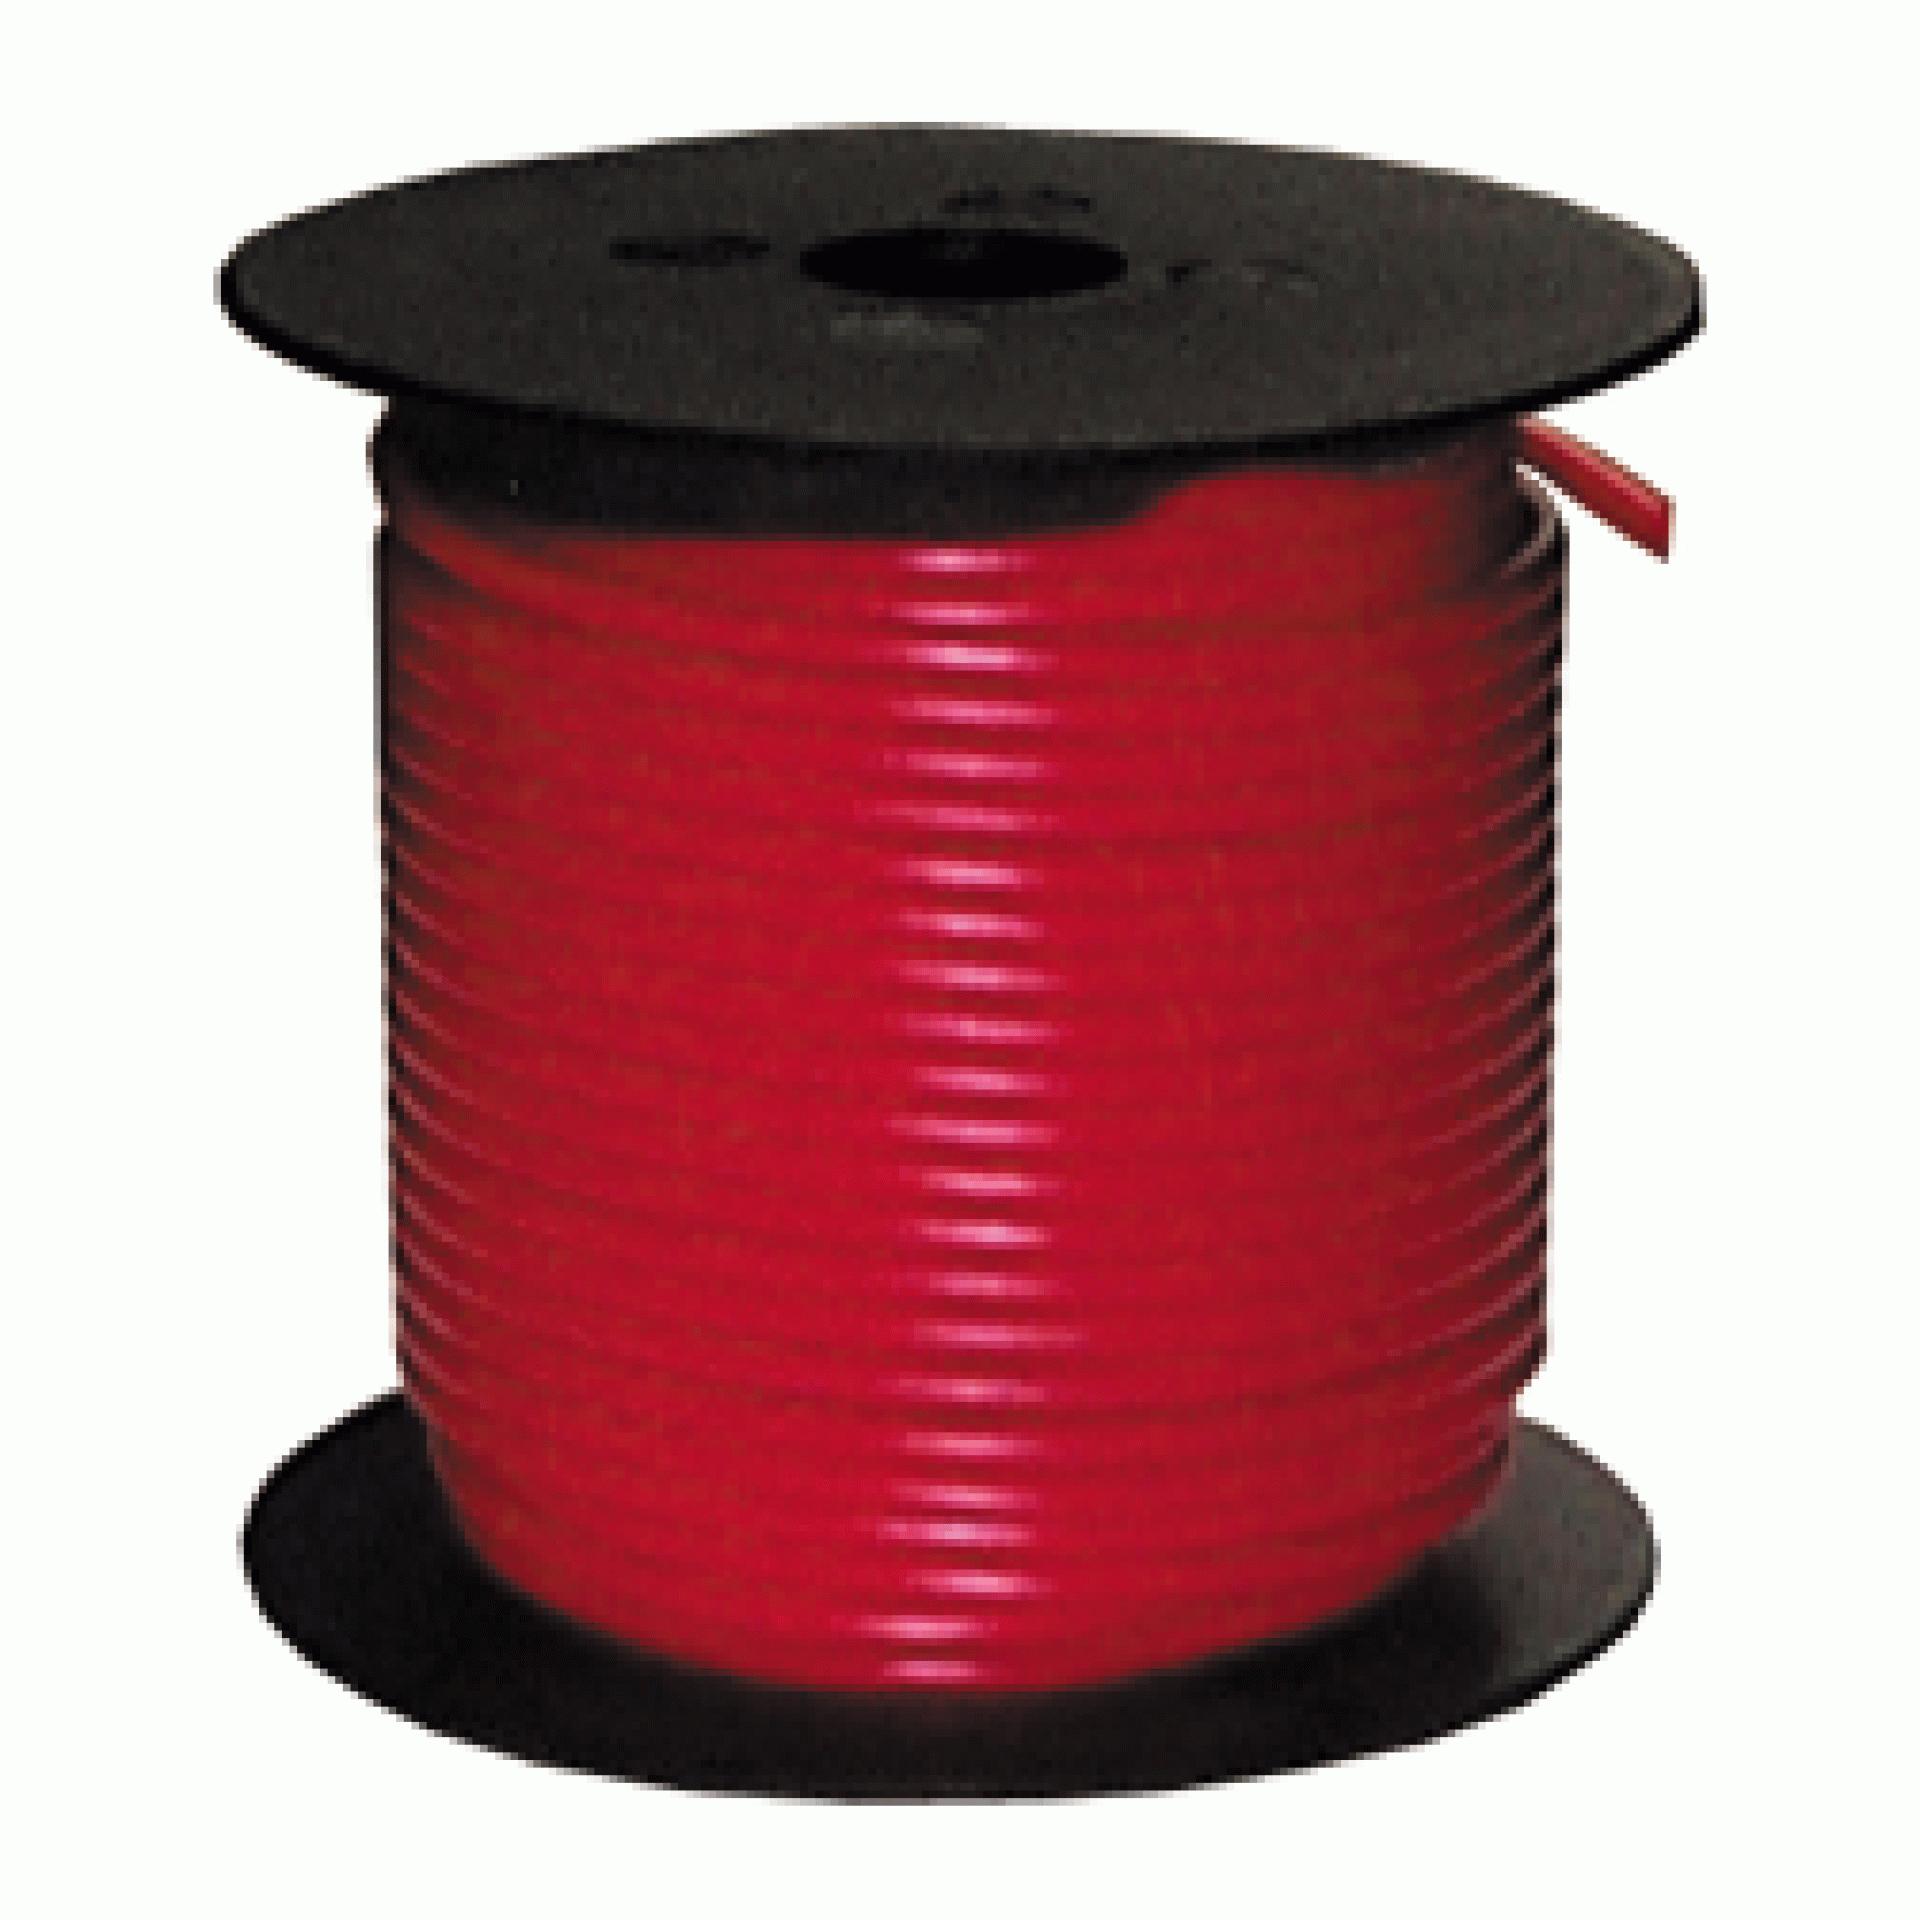 DEKA | 02408 | PRIMARY COPPER WIRE - RED - 14 GAUGE 100' SPOOLS